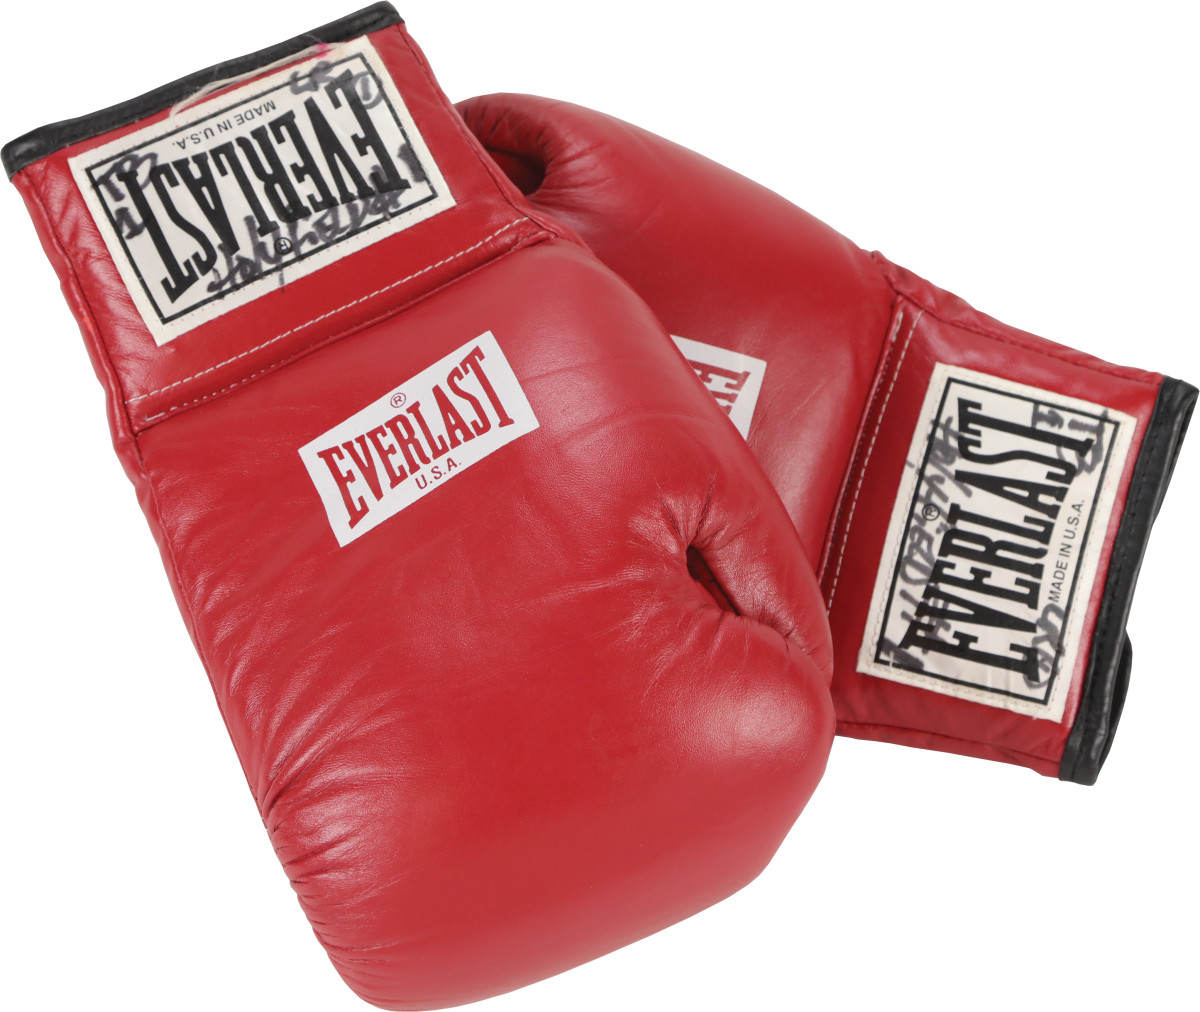 Boxing gloves Evander Holyfield wore during his 1997 fight when Mike Tyson bit off a chunk of his ear.